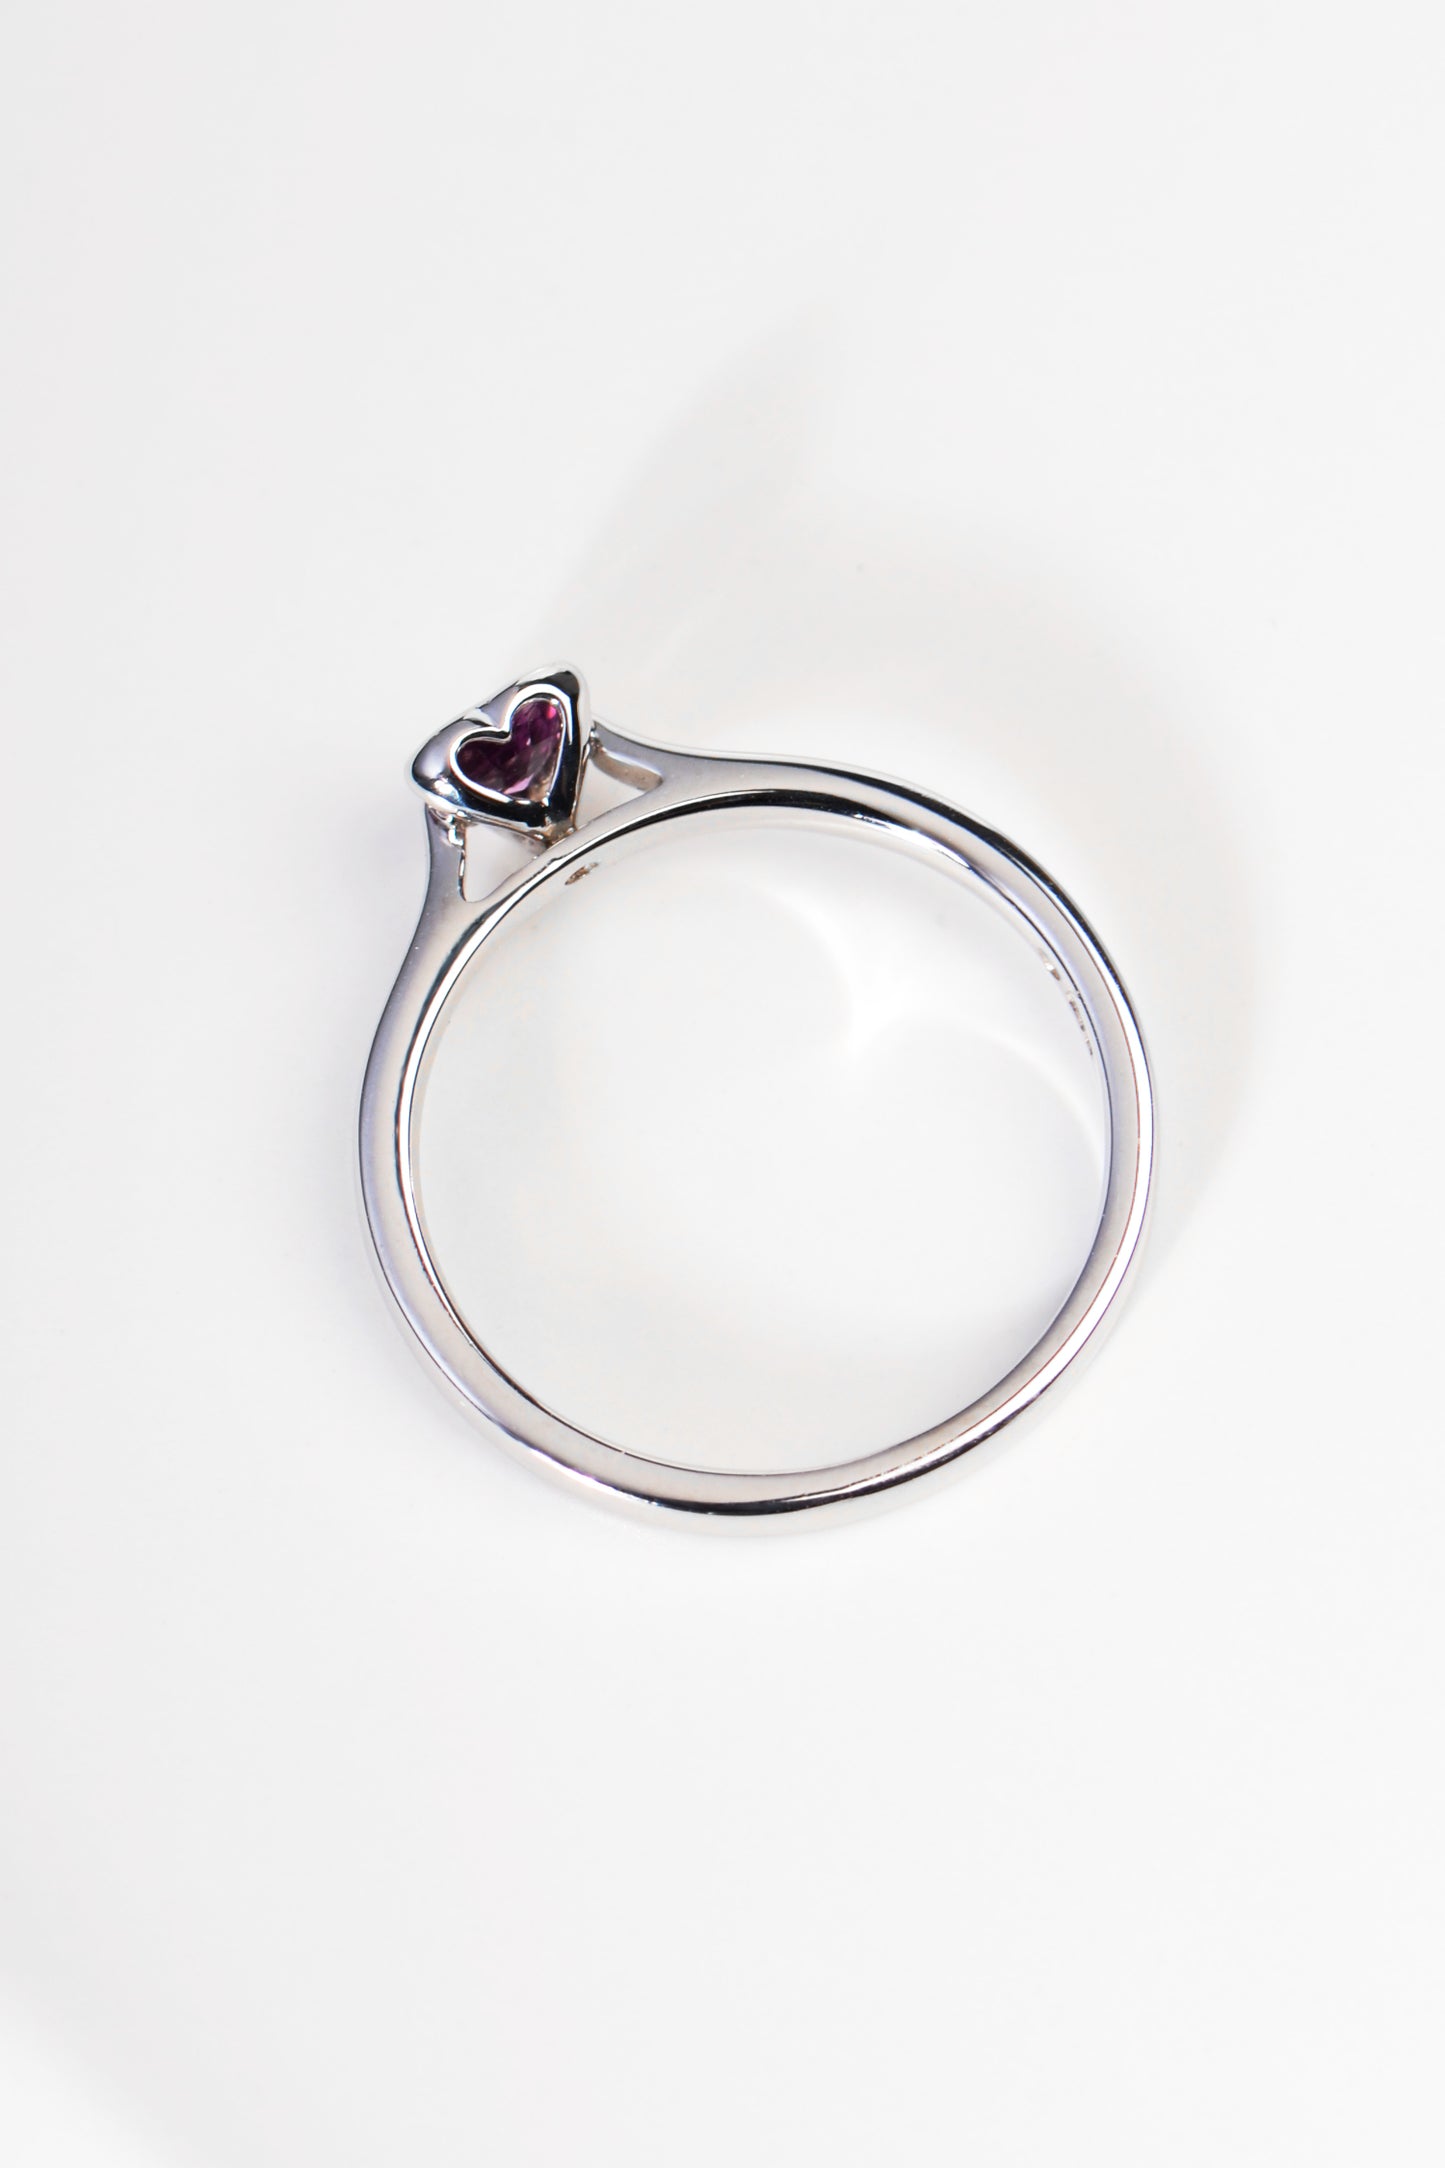 white gold ring with heart shaped cut out on side of ring setting